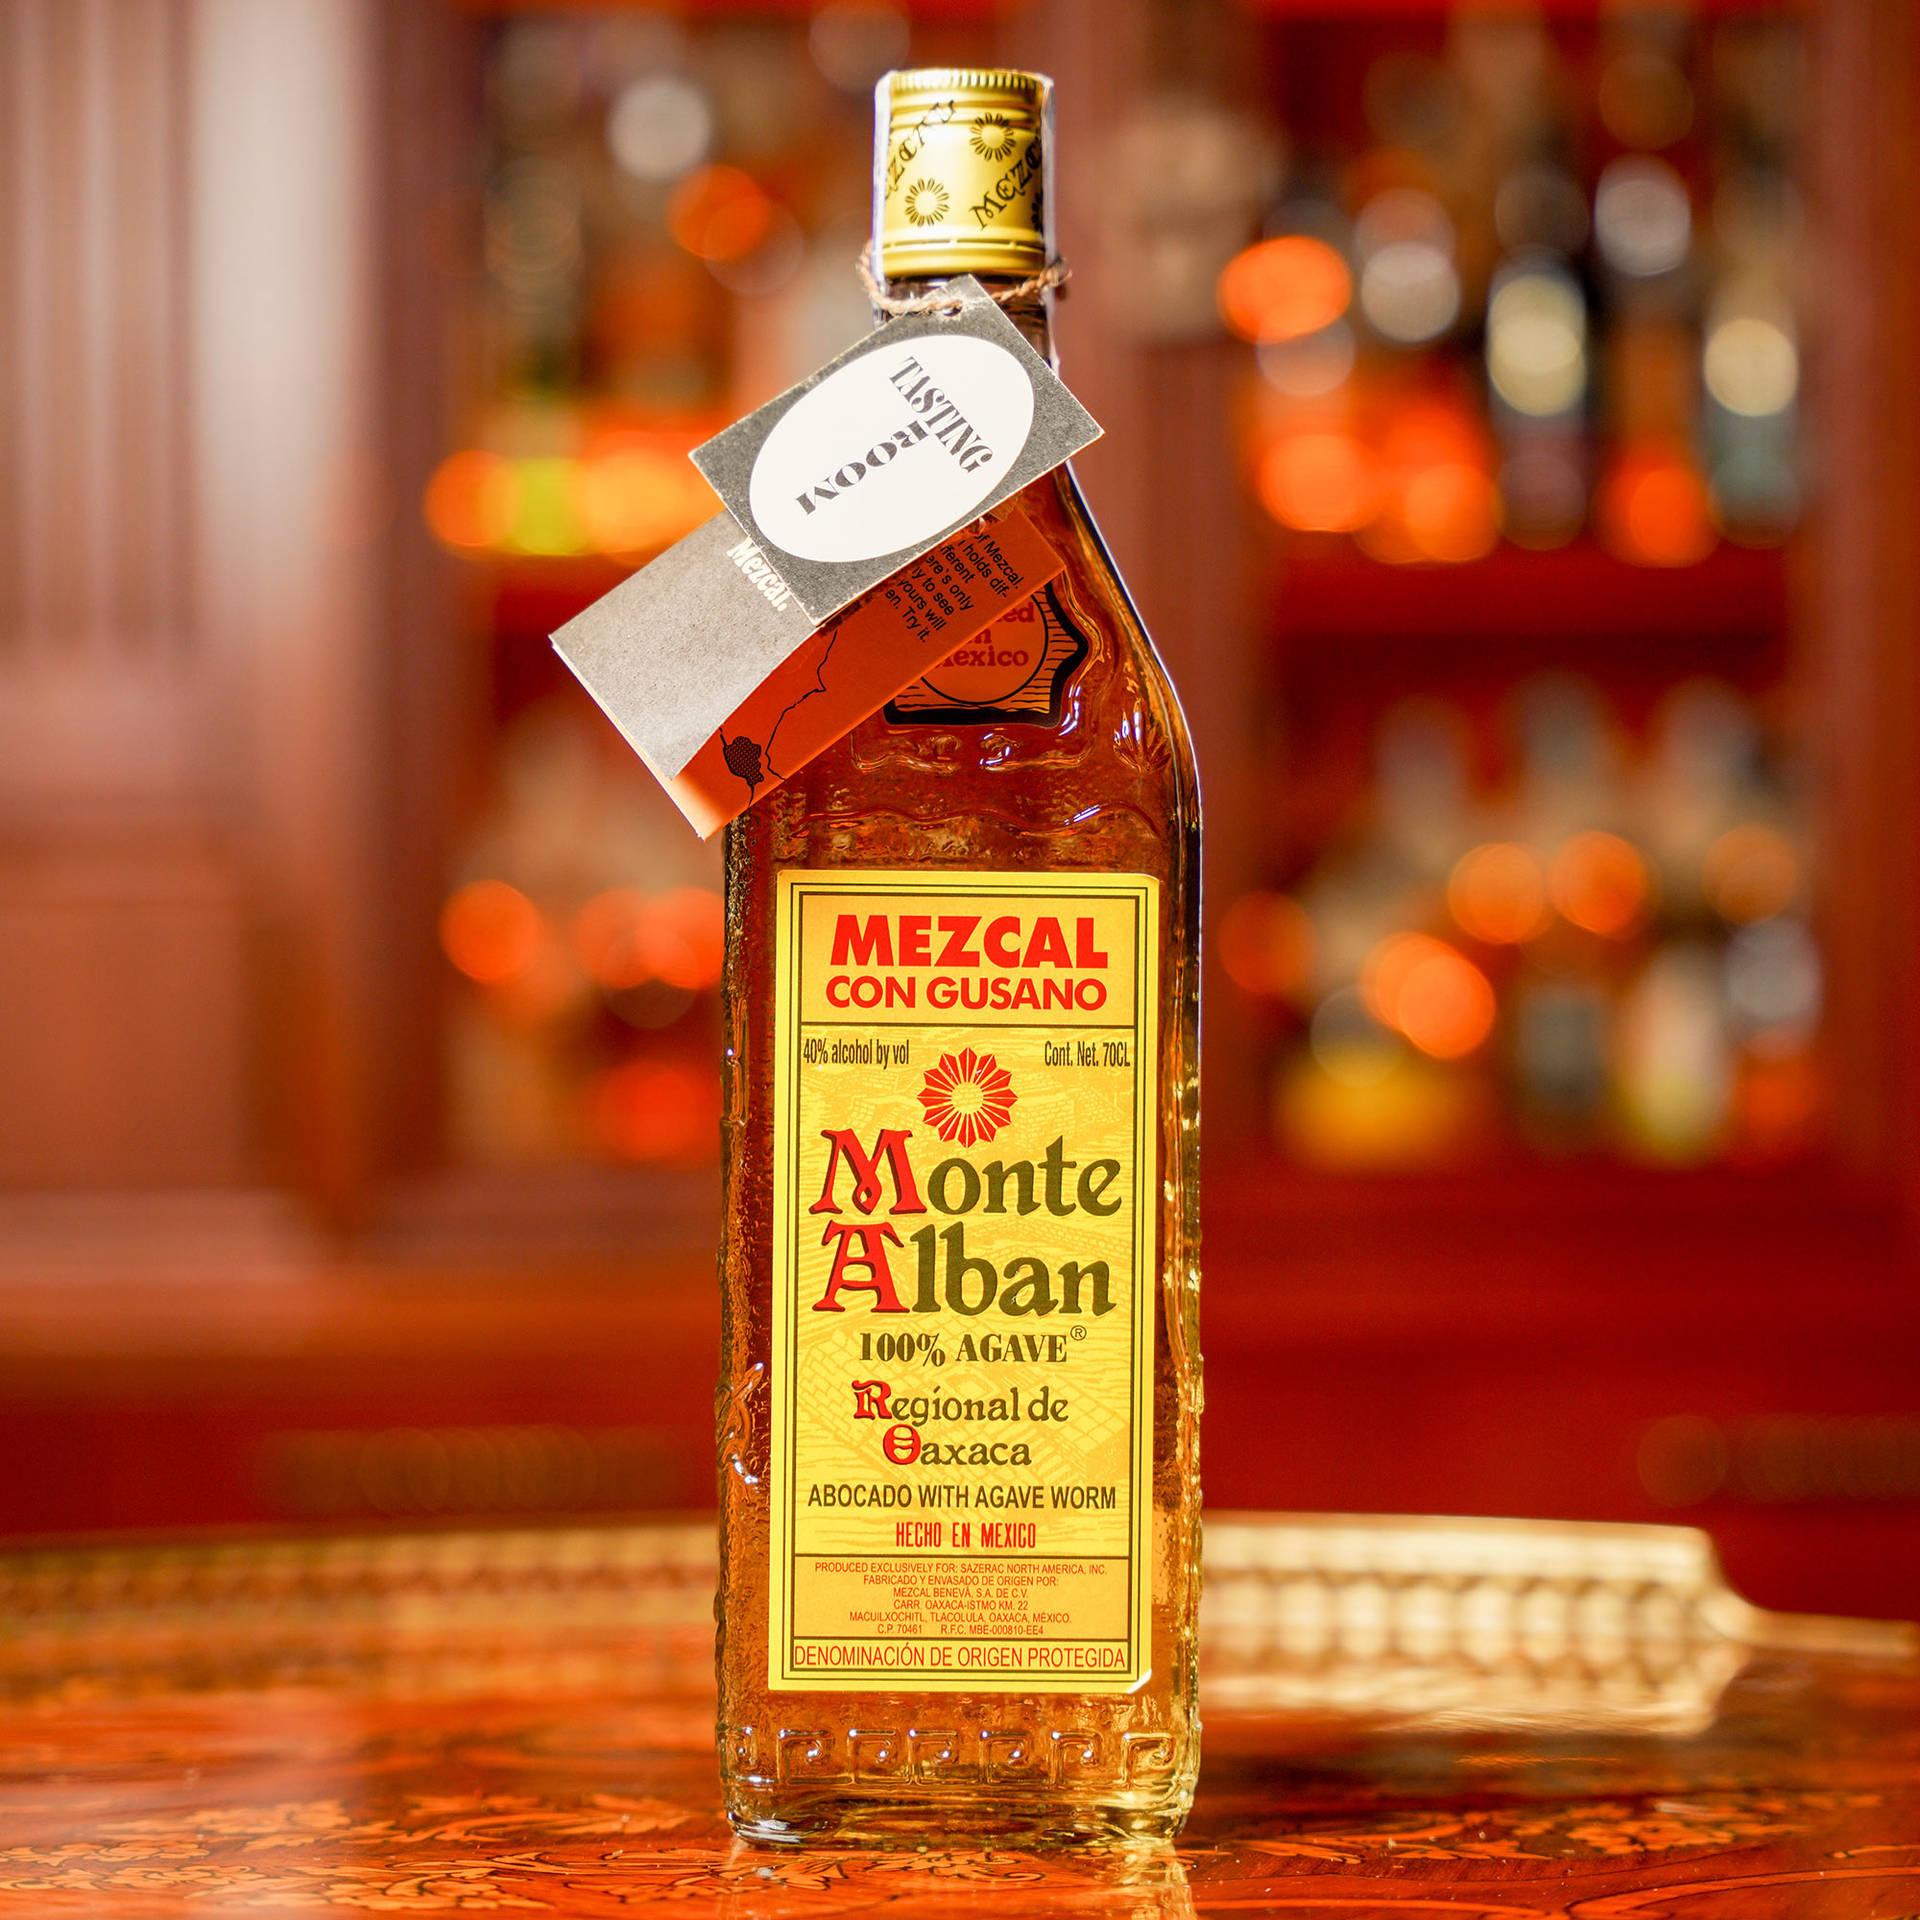 Monte Alban Mezcal Tequila Elegantly Displayed on Wooden Table Wallpaper